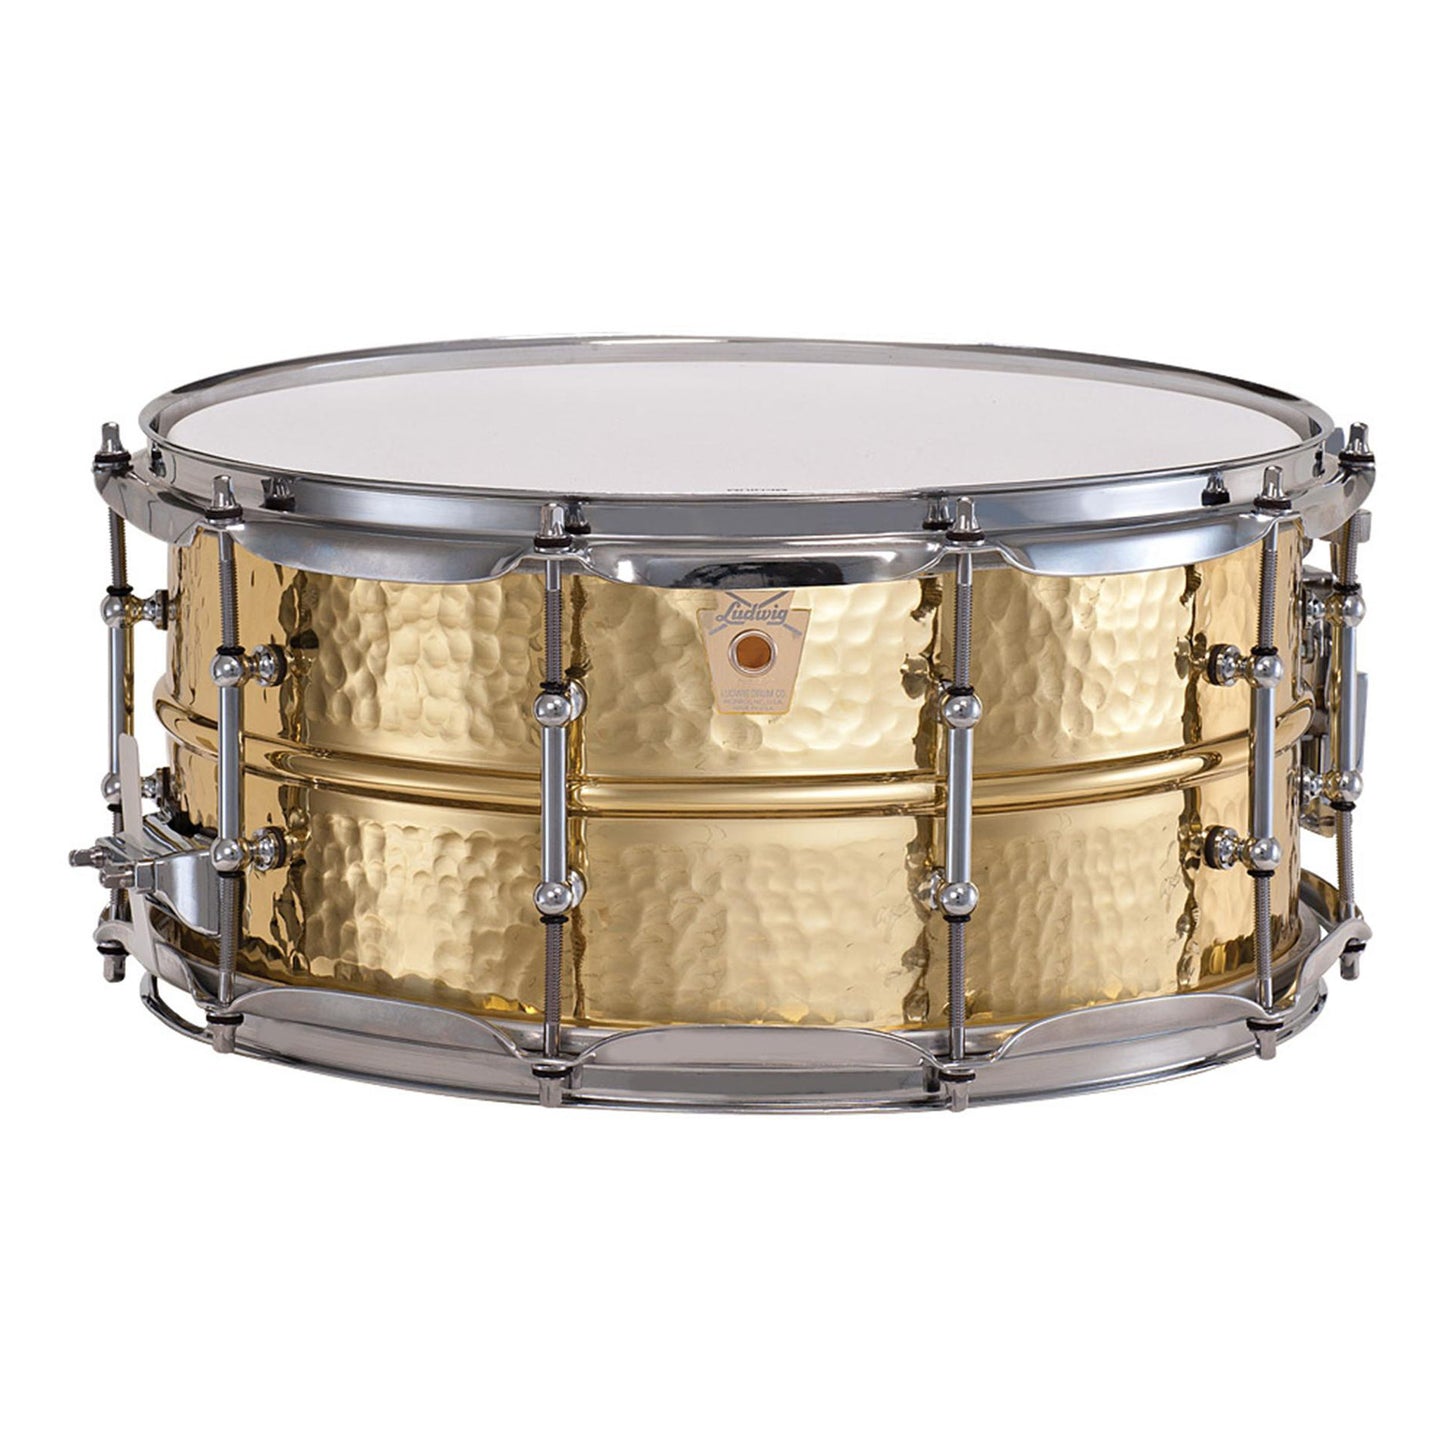 Ludwig Hammered Brass Snare Drum - 6.5x14" - Tube Lugs